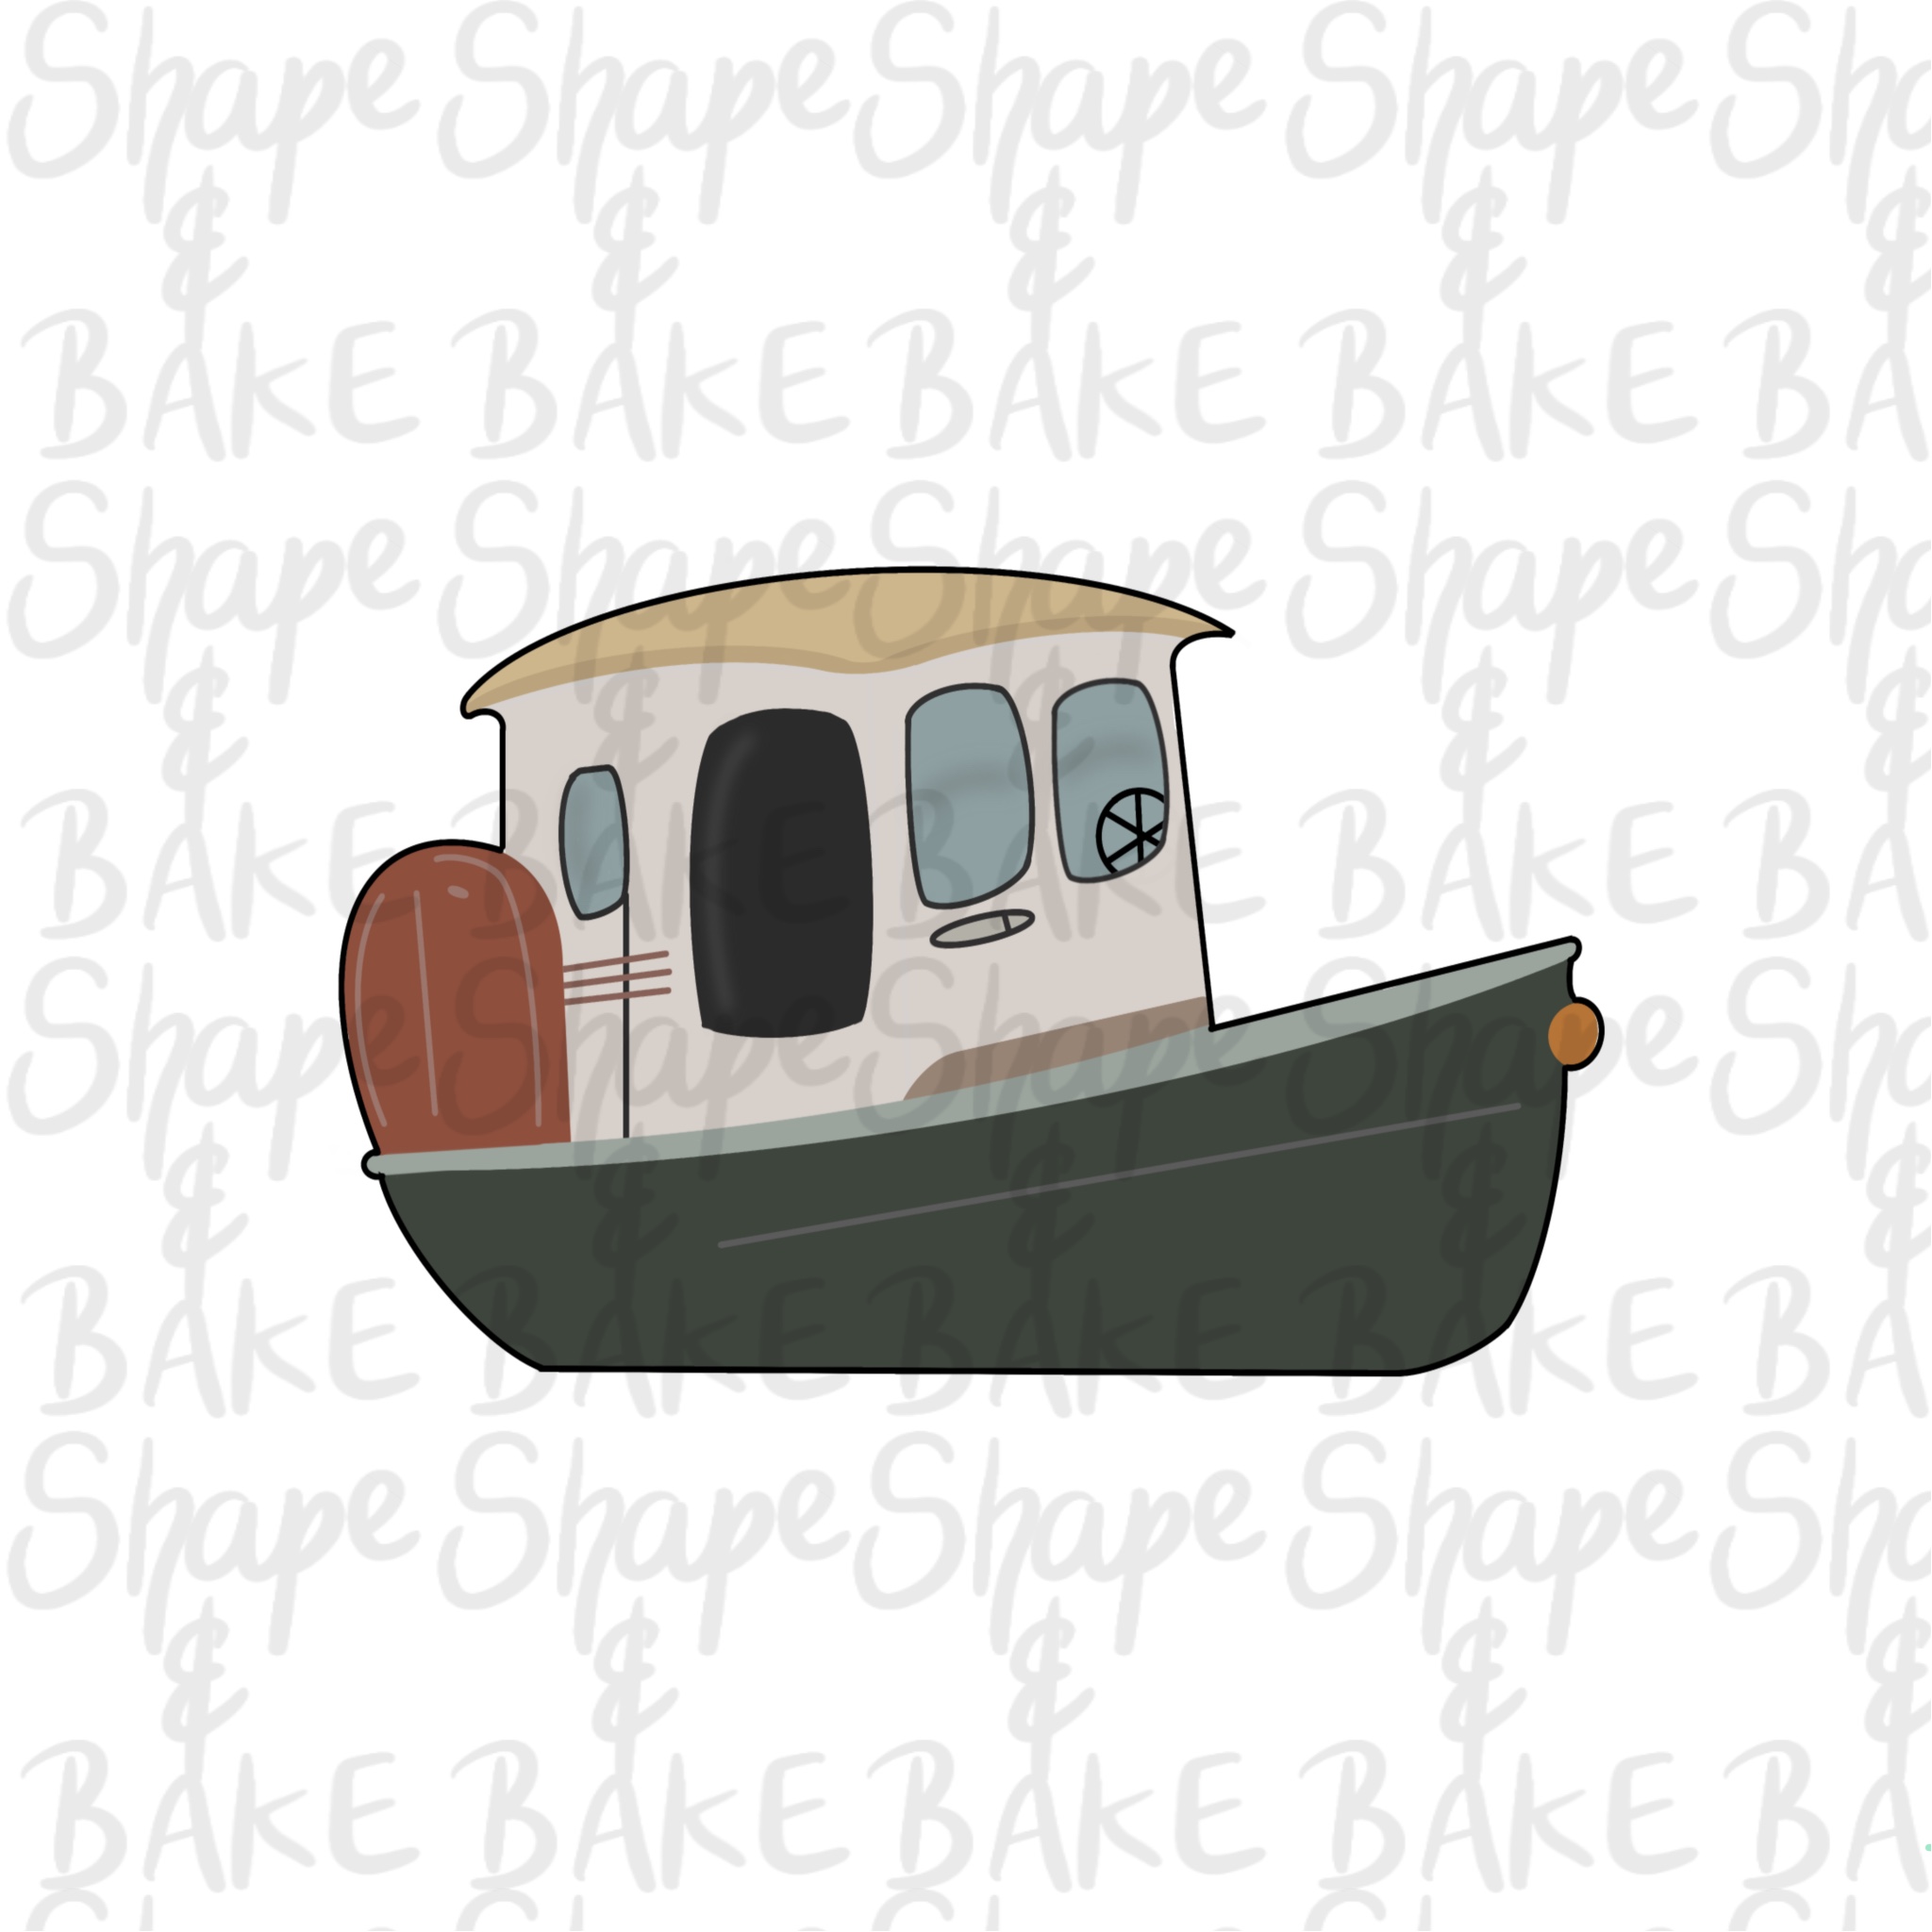 Fishing boat cookie cutter – Shape and Bake